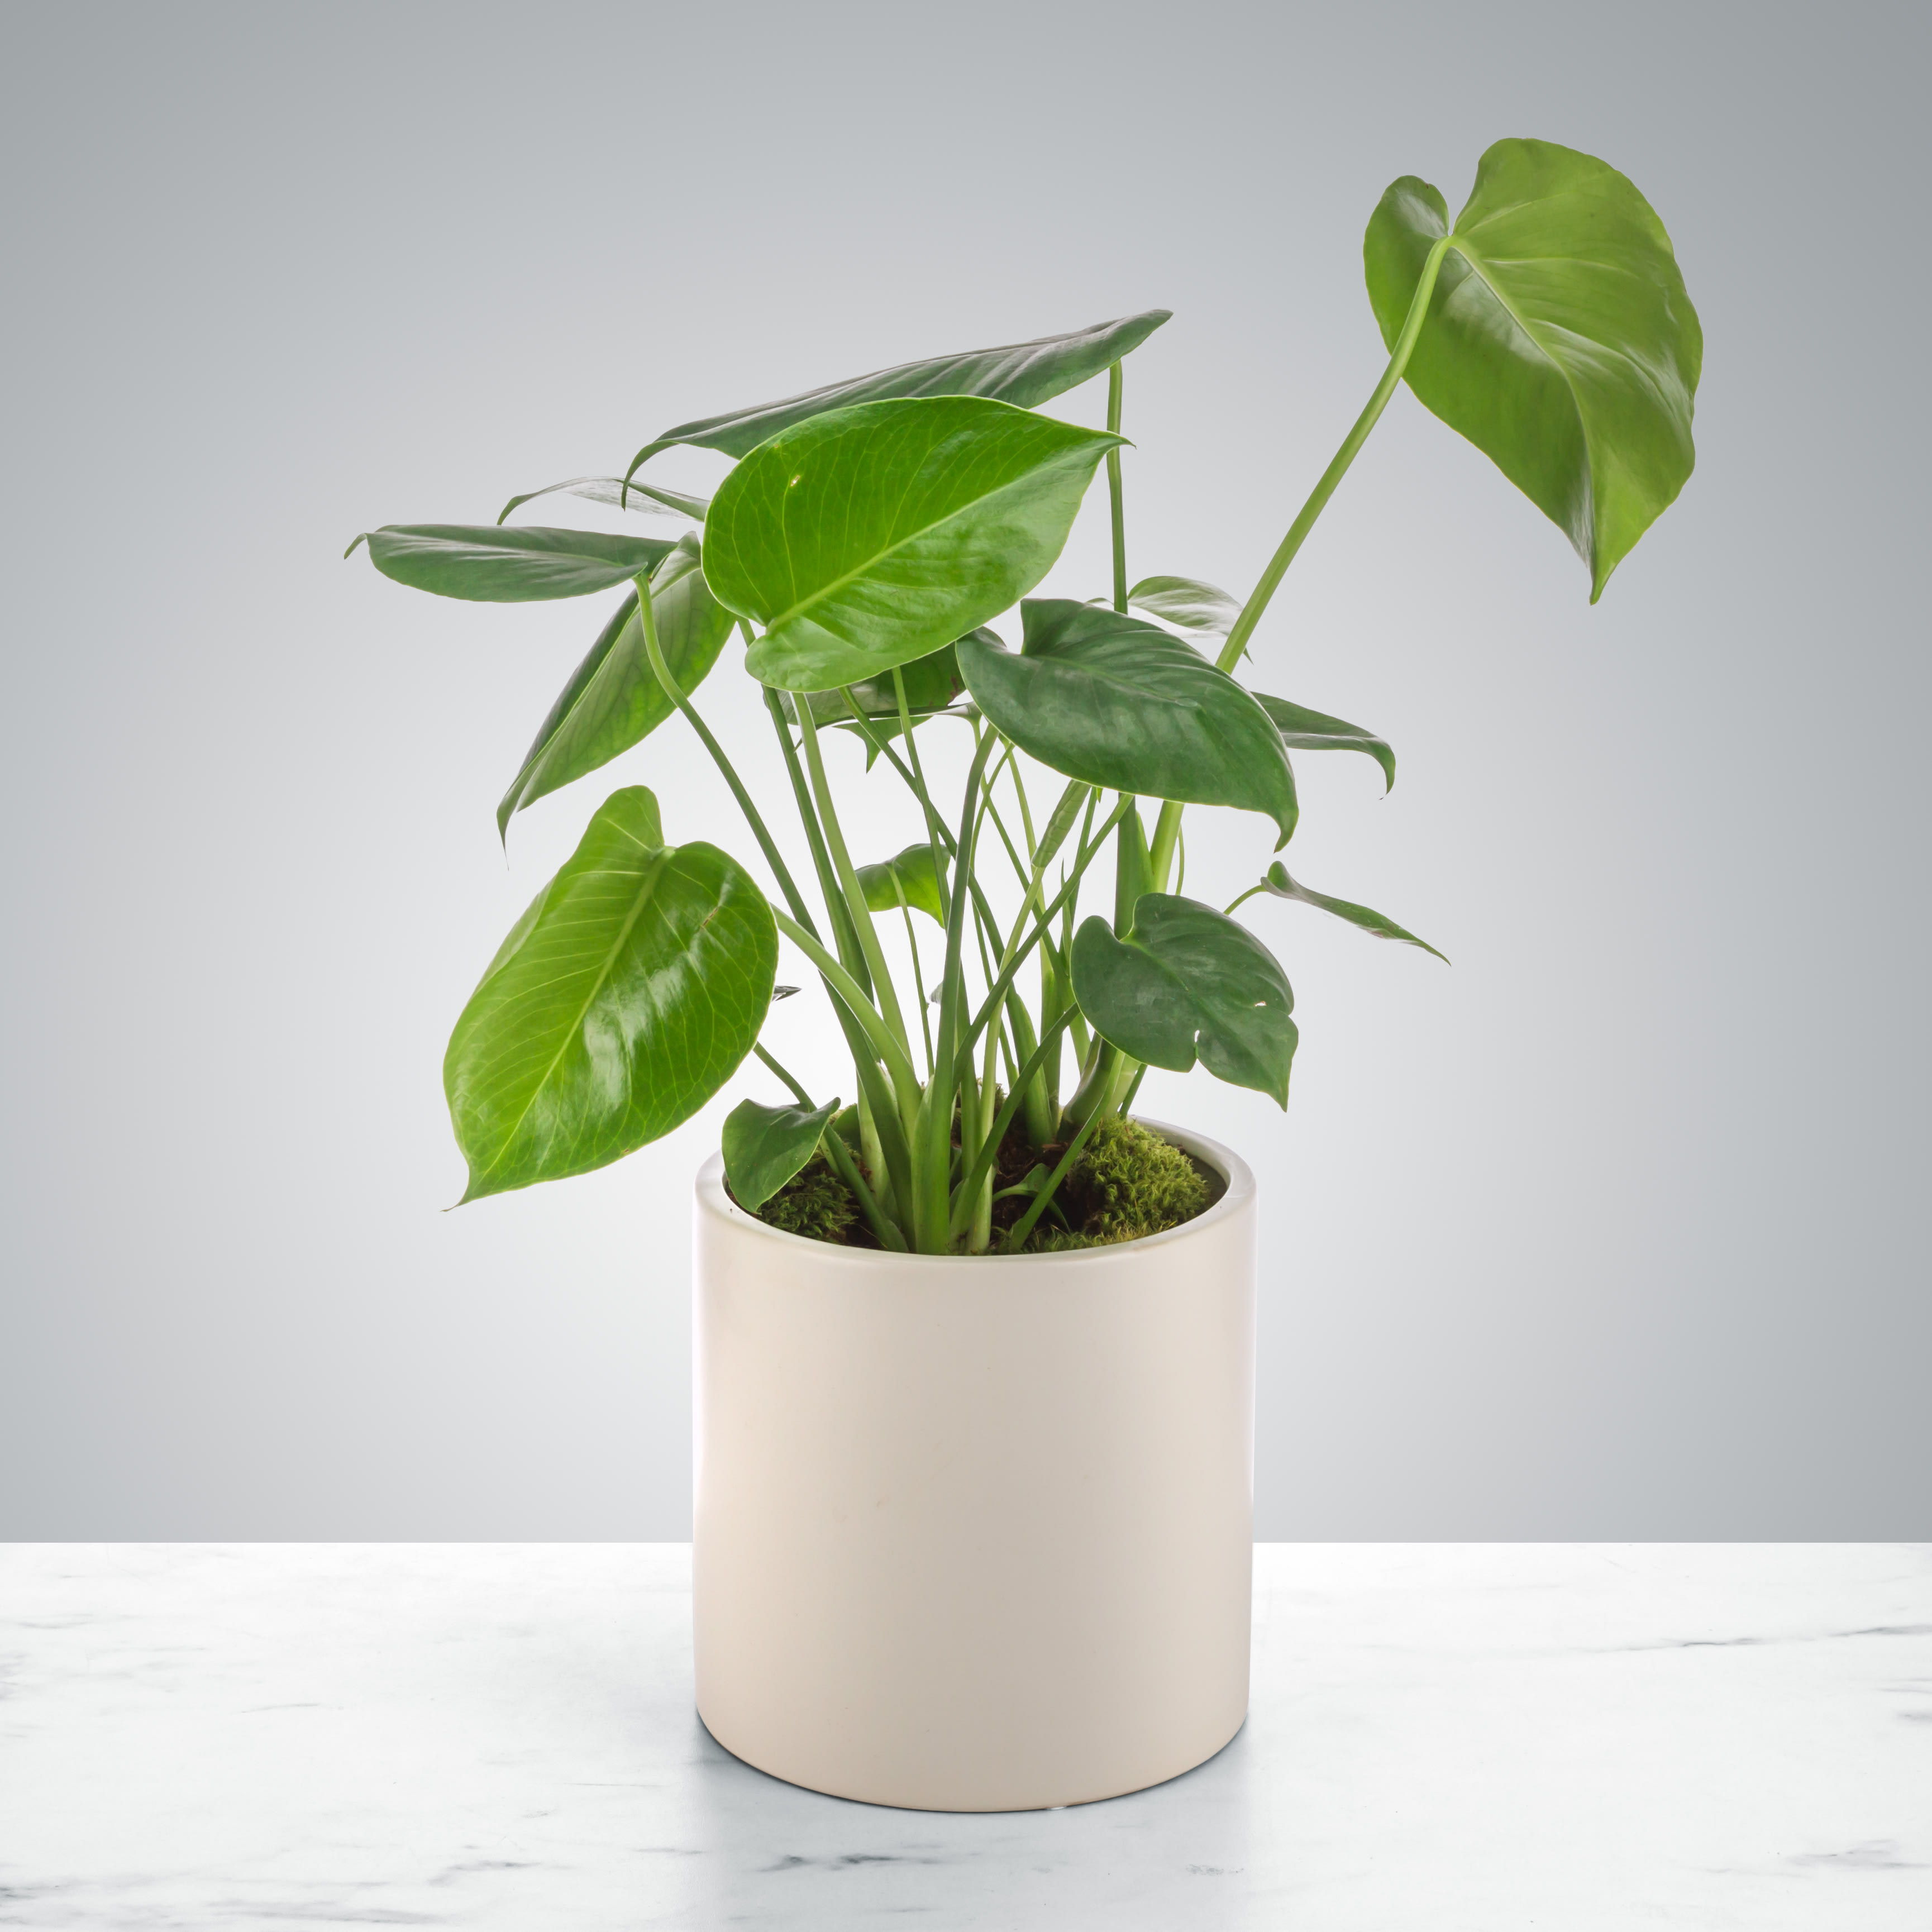 Monstera Plant by BloomNation™ - The Monstera is a classic house plant that likes bright to medium indirect light. Send it to your trendiest friend to make their space blog-worthy.